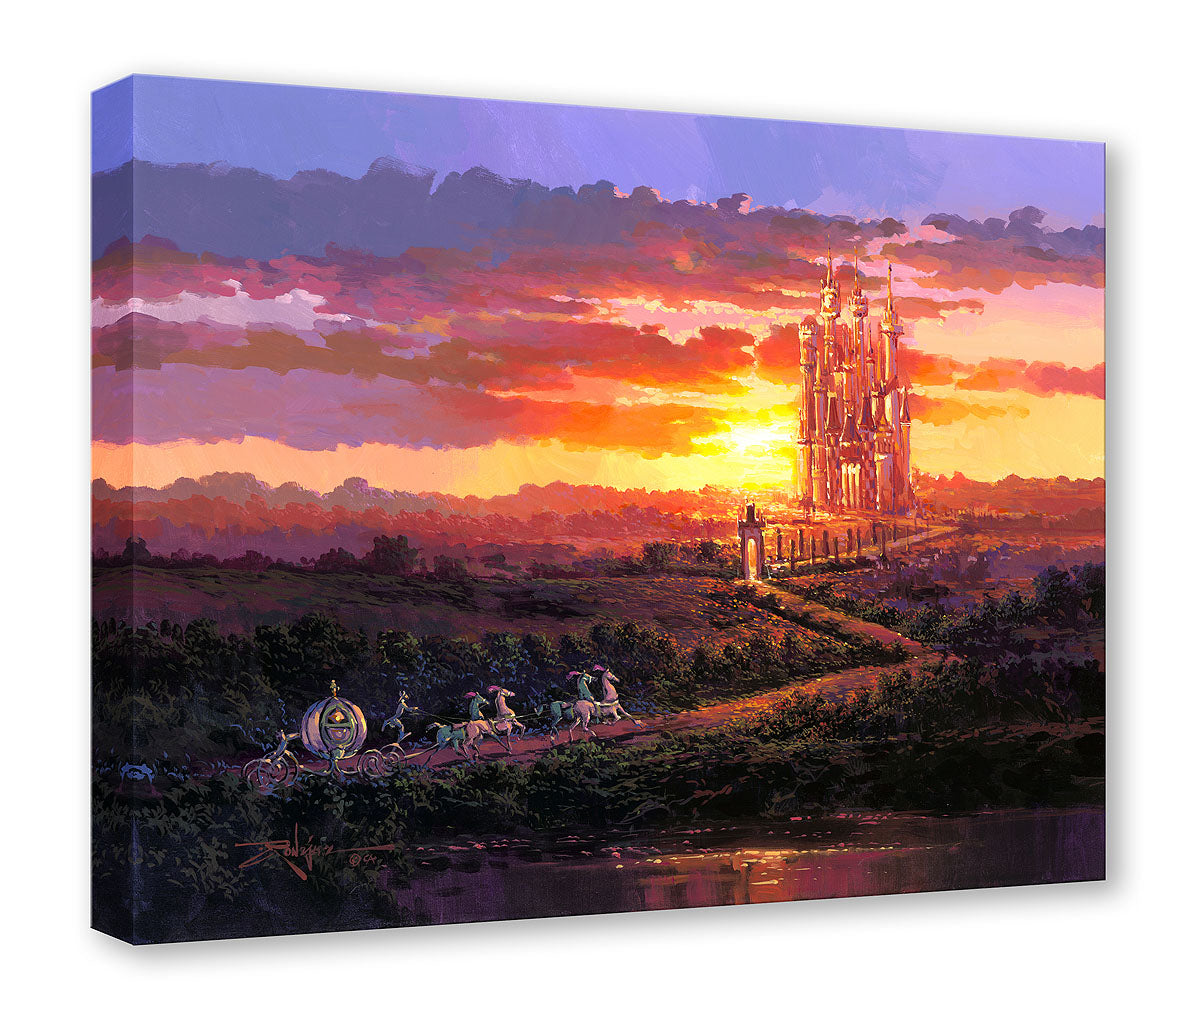 Castle At Sunset By Rodel Gonzalez Signed And Numbered Editiondisney Artwork Disney Fine Art 2686